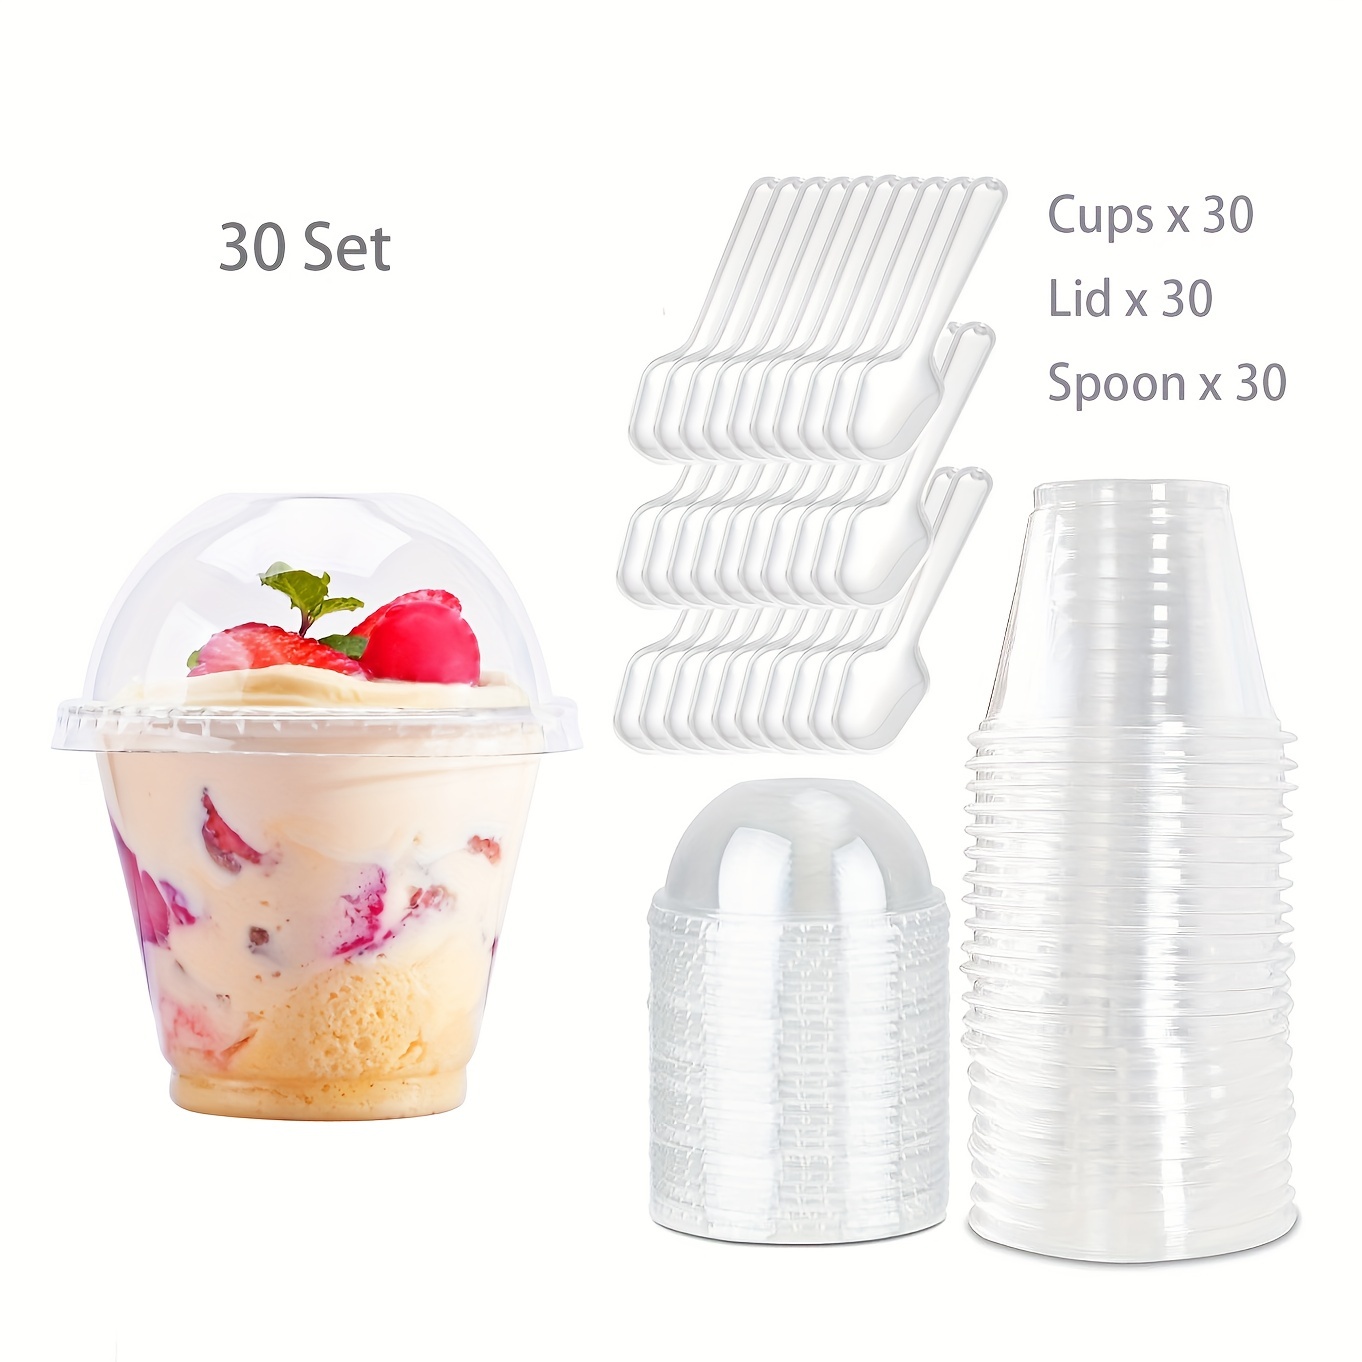 100 Ct 1 Oz Clear Plastic Portion Cups, Jello Shot Condiment Sauce Dip  Party Mixing Sampling, BPA Free Made in USA, Reusable & Disposable 